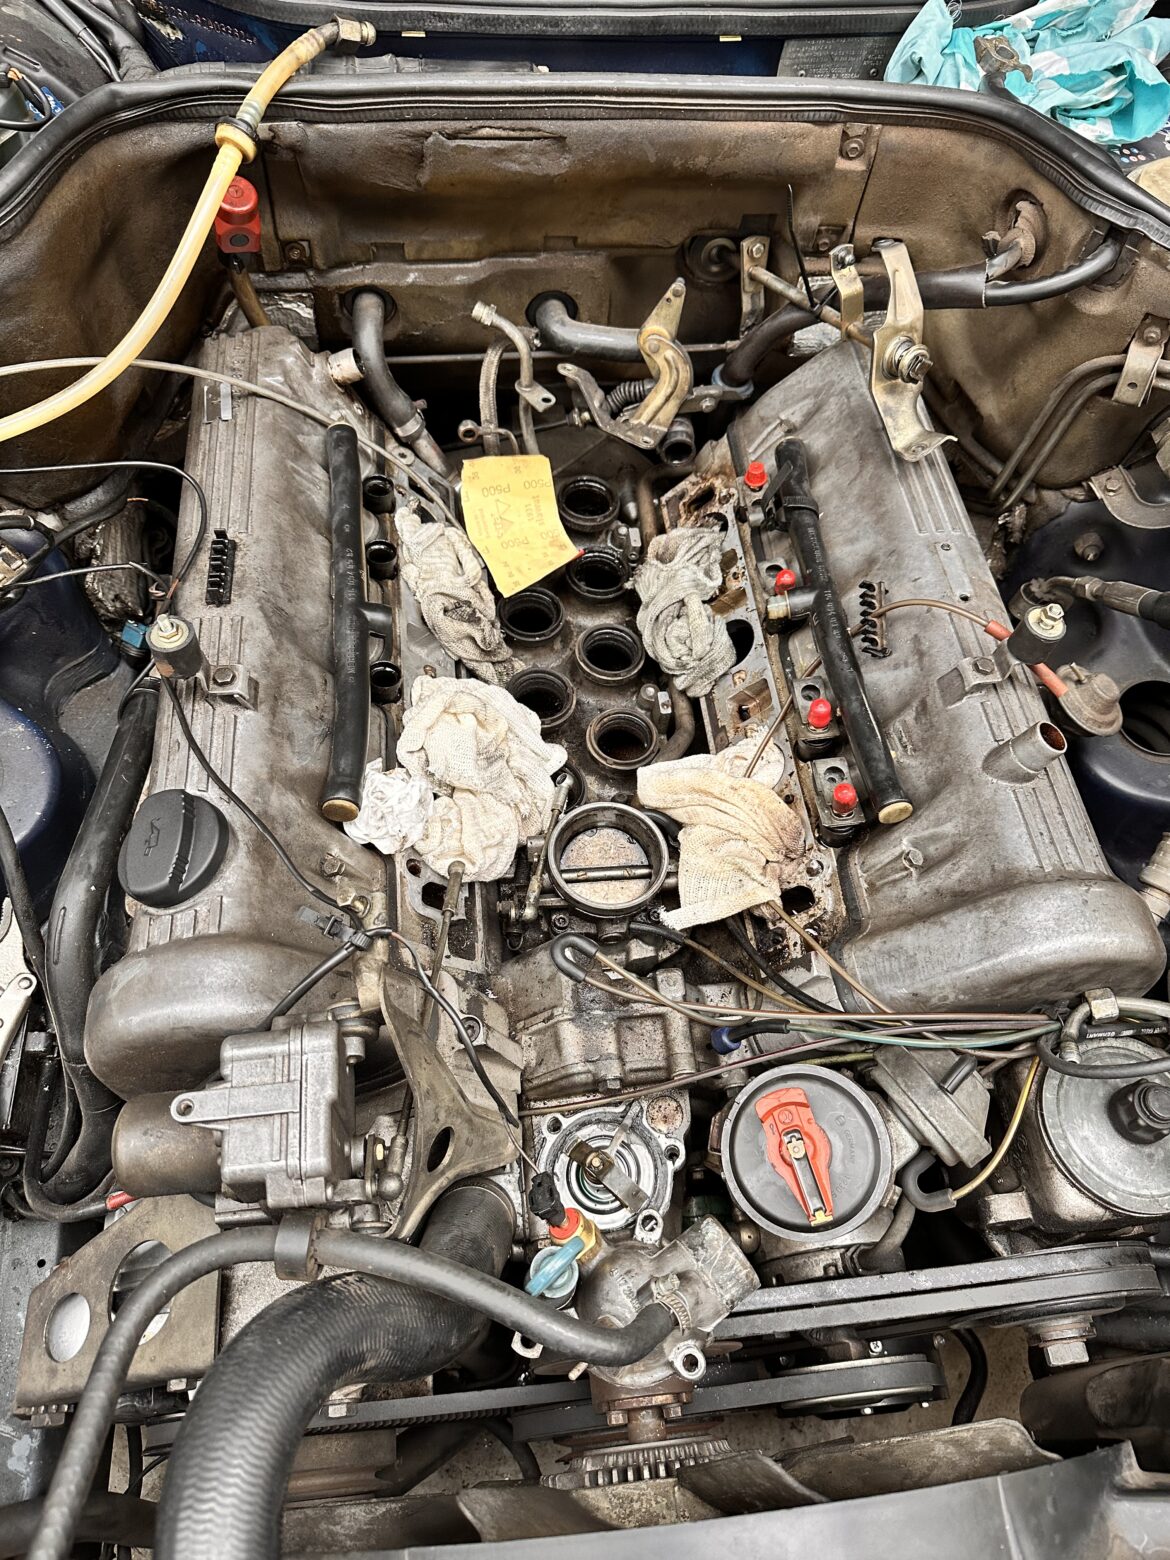 40 Year Old Mercedes-Benz 380SEC Is Idling Rough, Part1: Replacing The Intake Manifold Gaskets, But It’s Not Easy